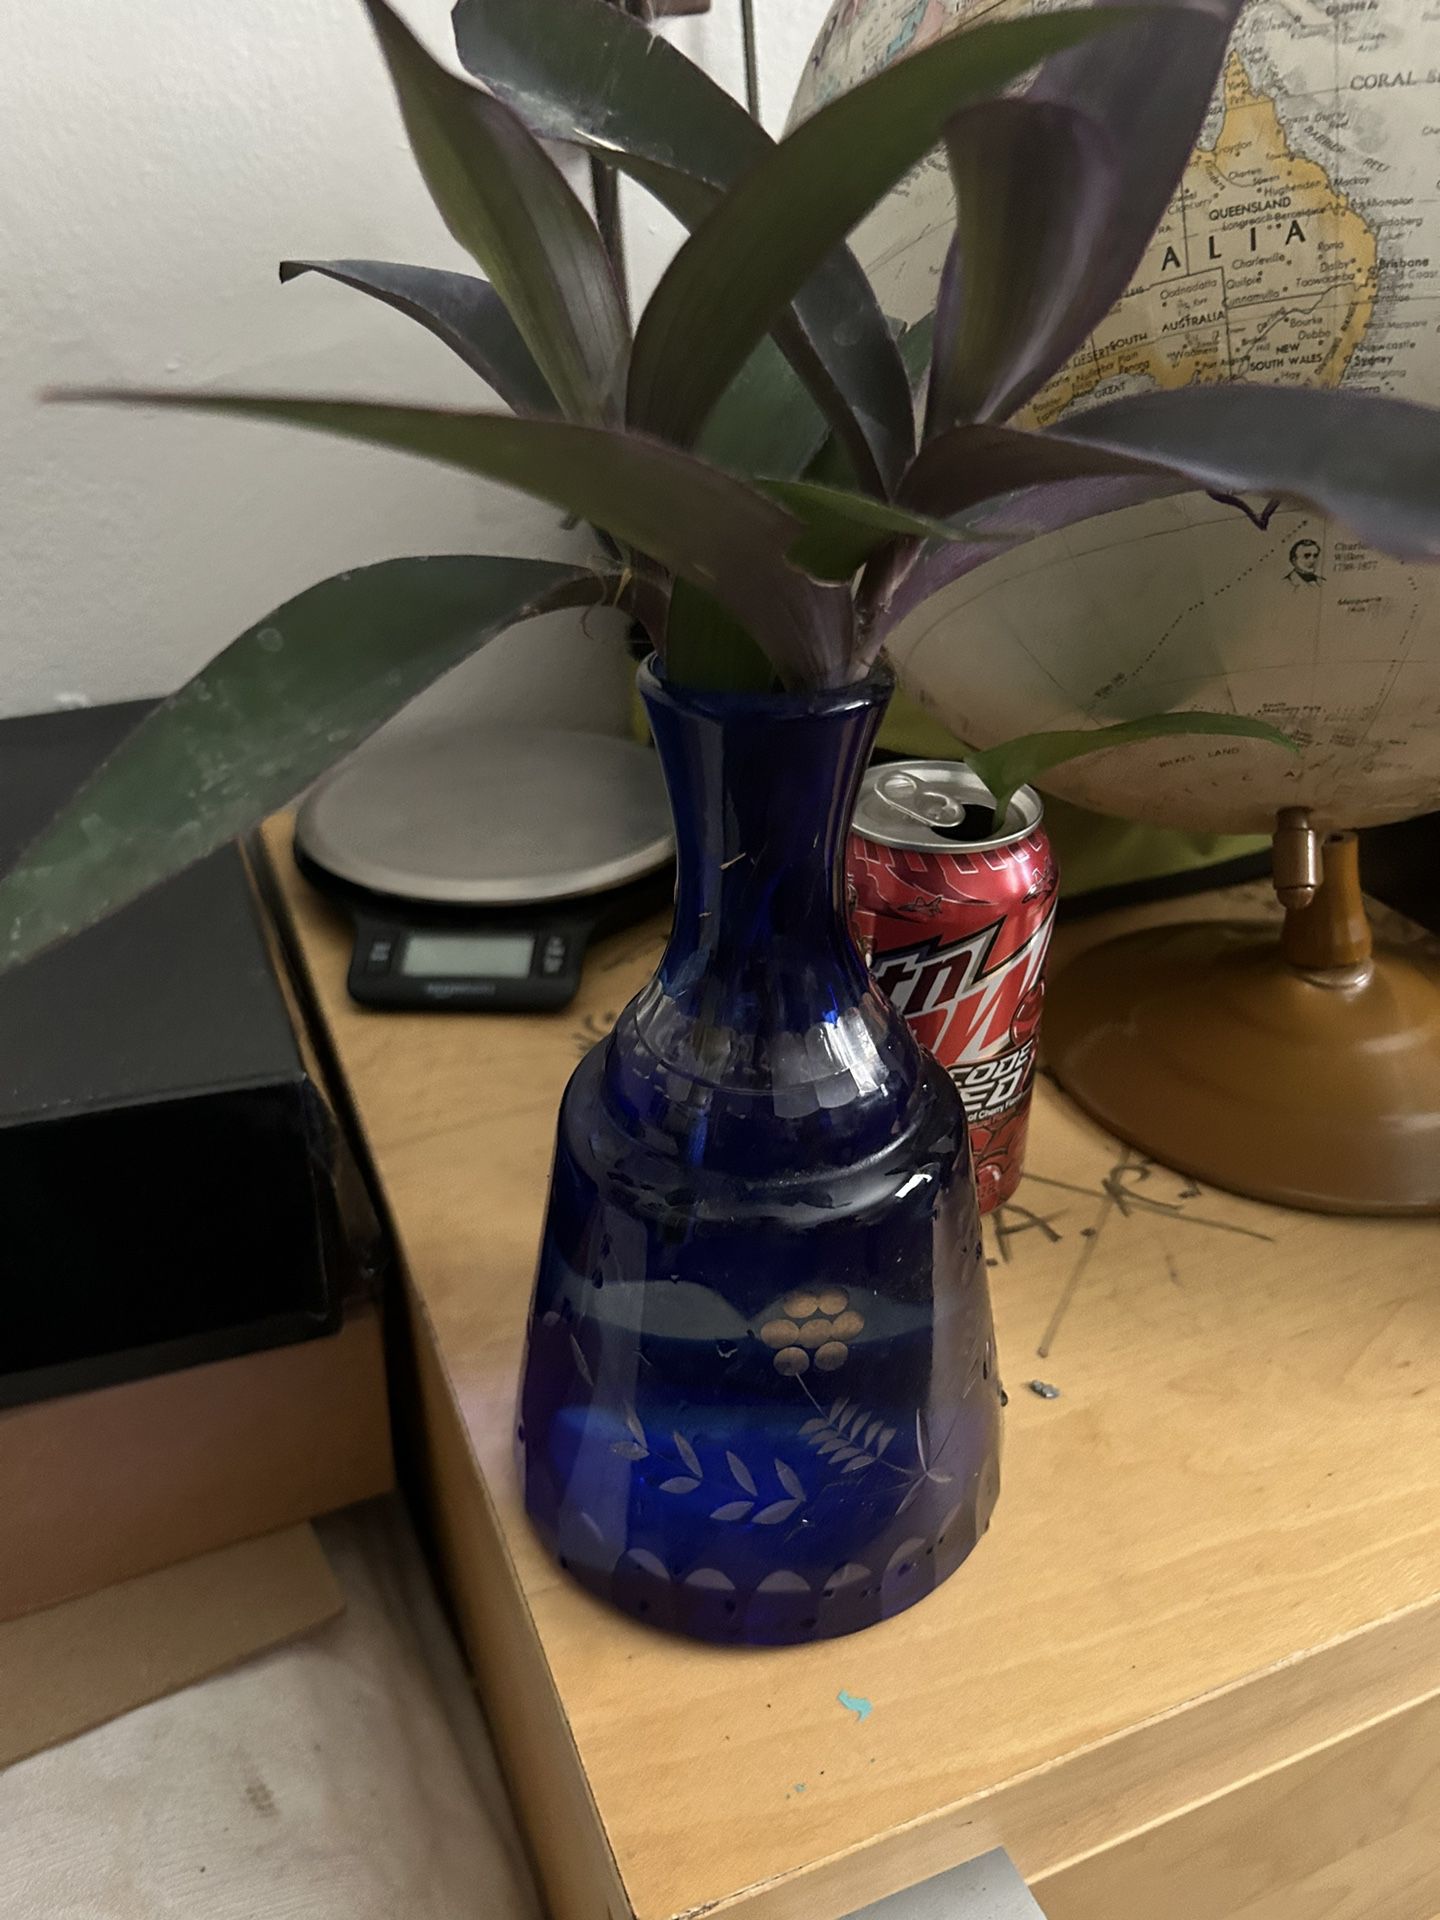 Ceramic Glass Vase 🏺 Live Purple Heart 💜 Wandering Jew Plant 🌱   Just add water 💦 to keep it alive. Clean water bi weekly or every two weeks to ma